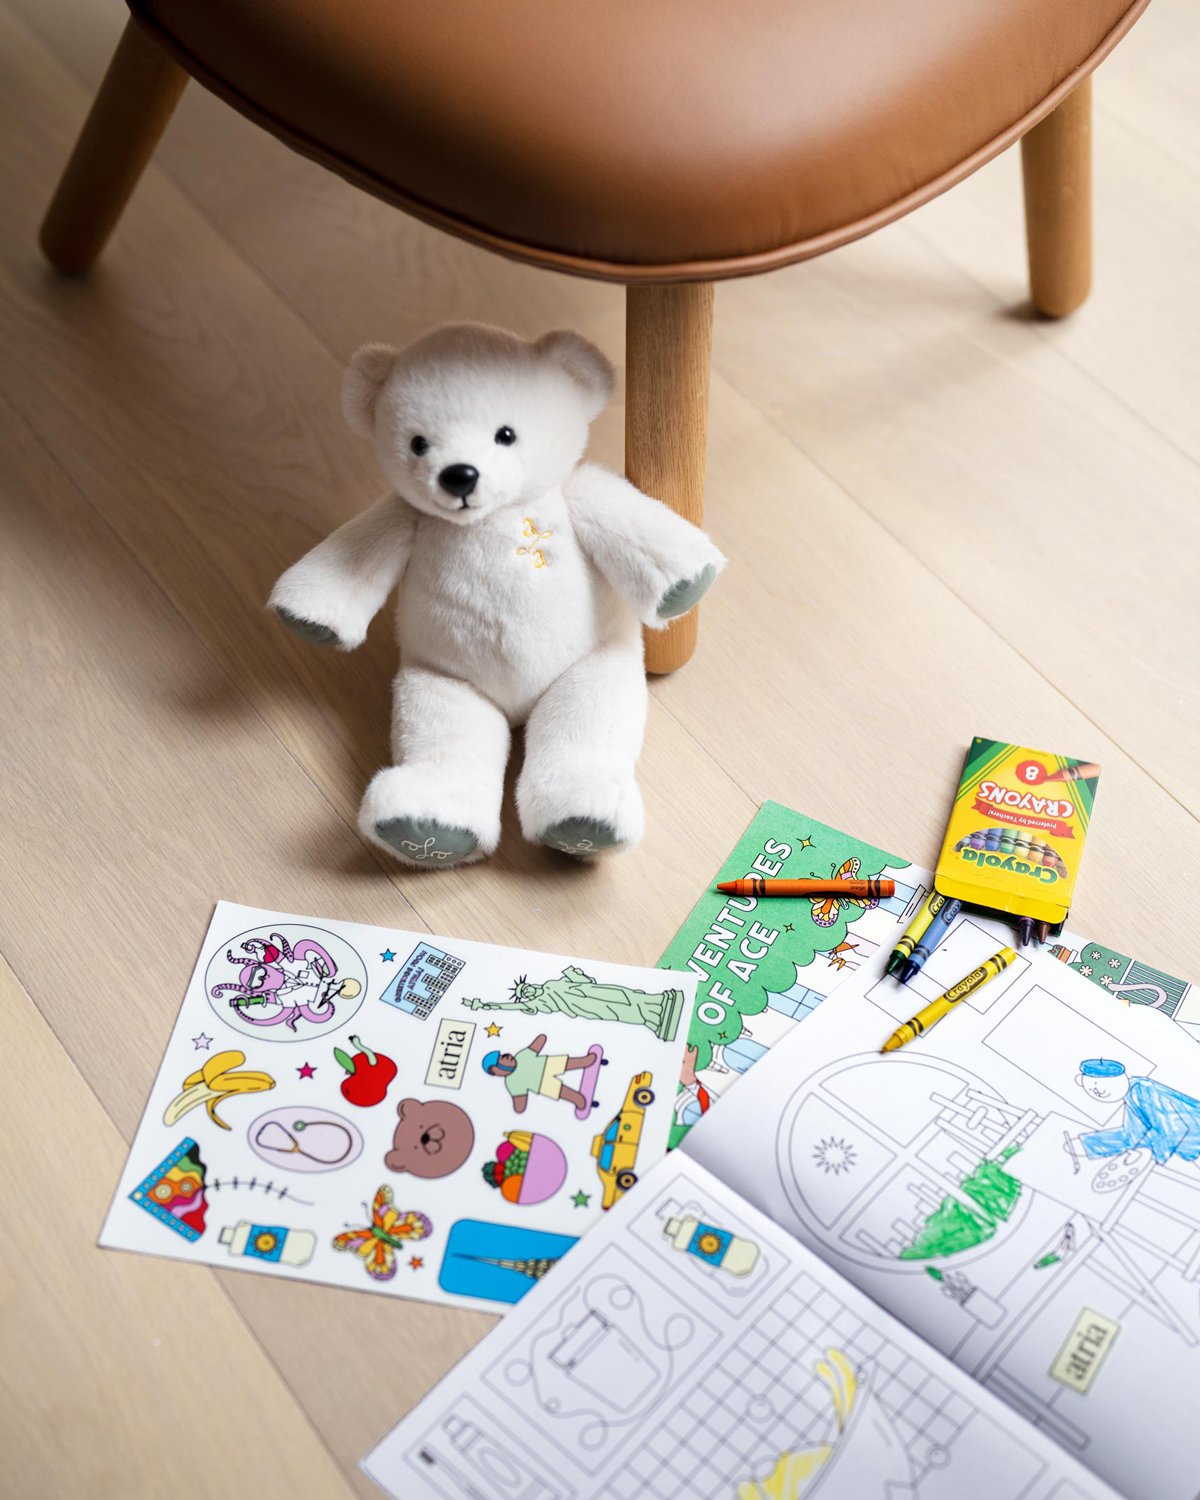 Branded and designed Atria coloring books for kids with Crayons and a white Teddy bear with a brand logo lockup